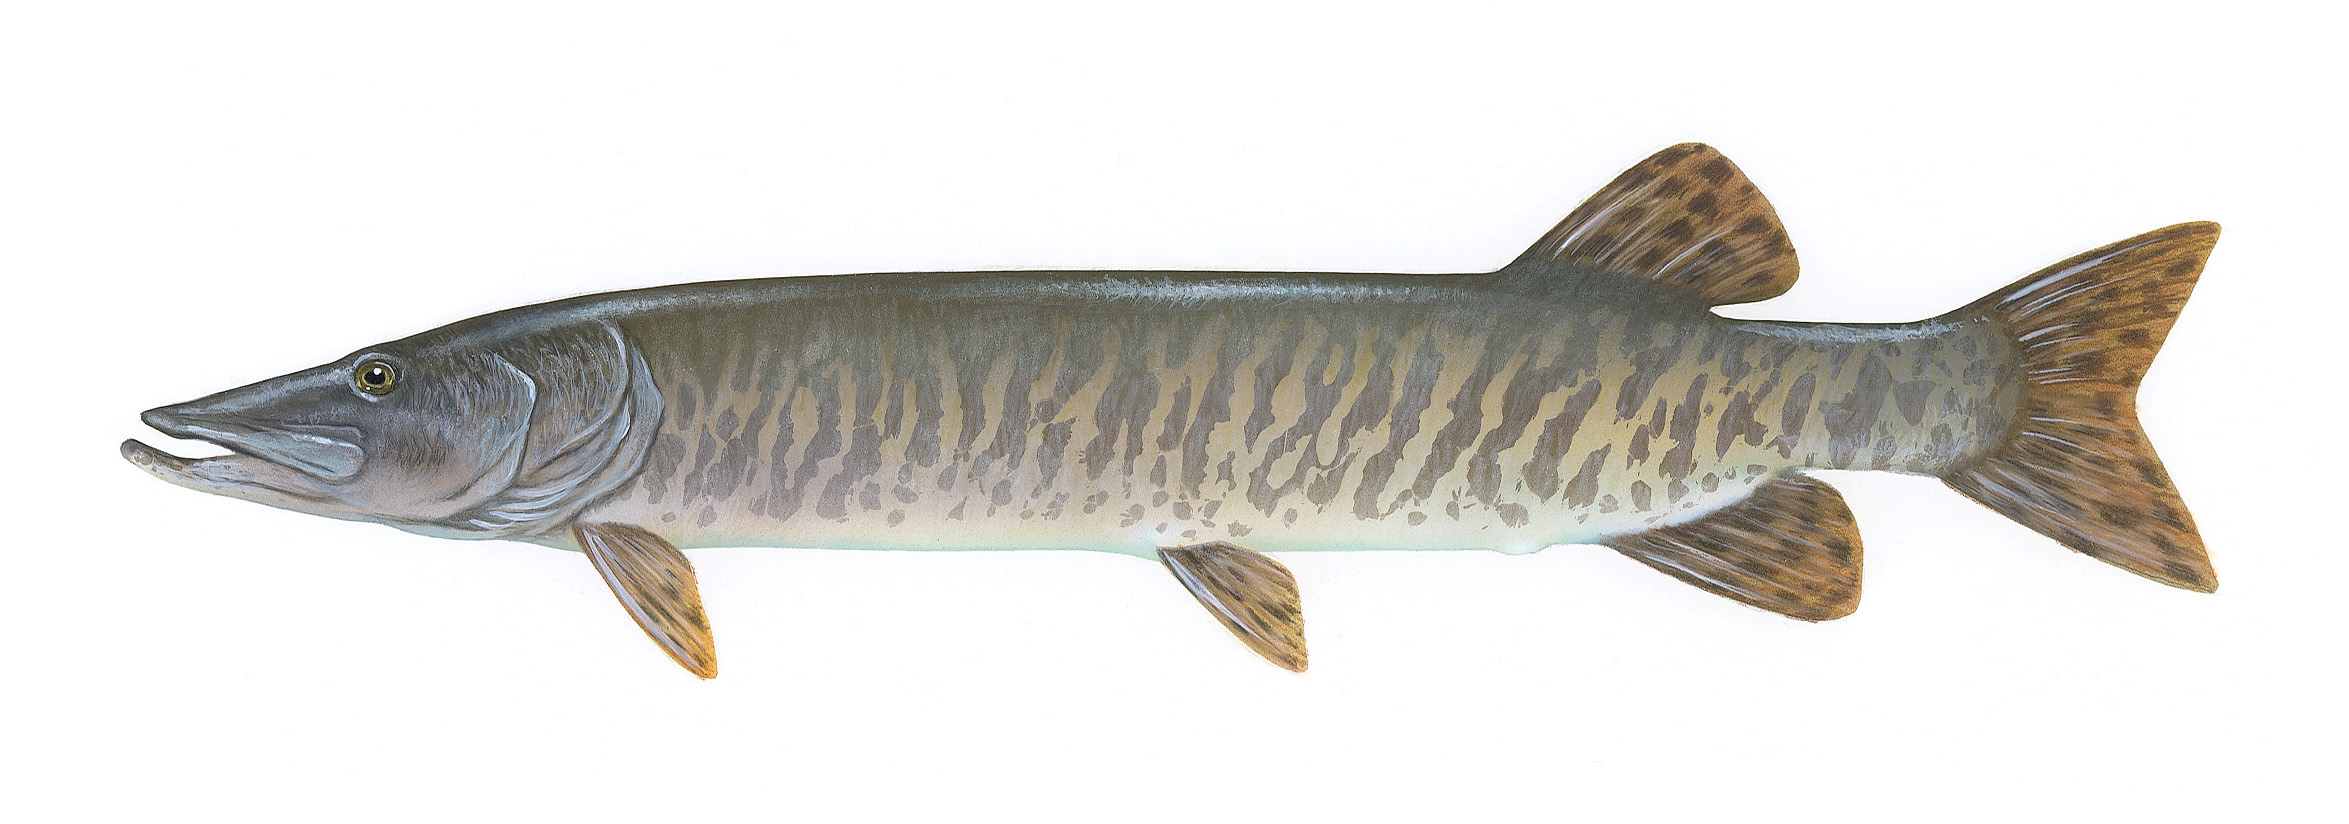 State fish of Wisconsin